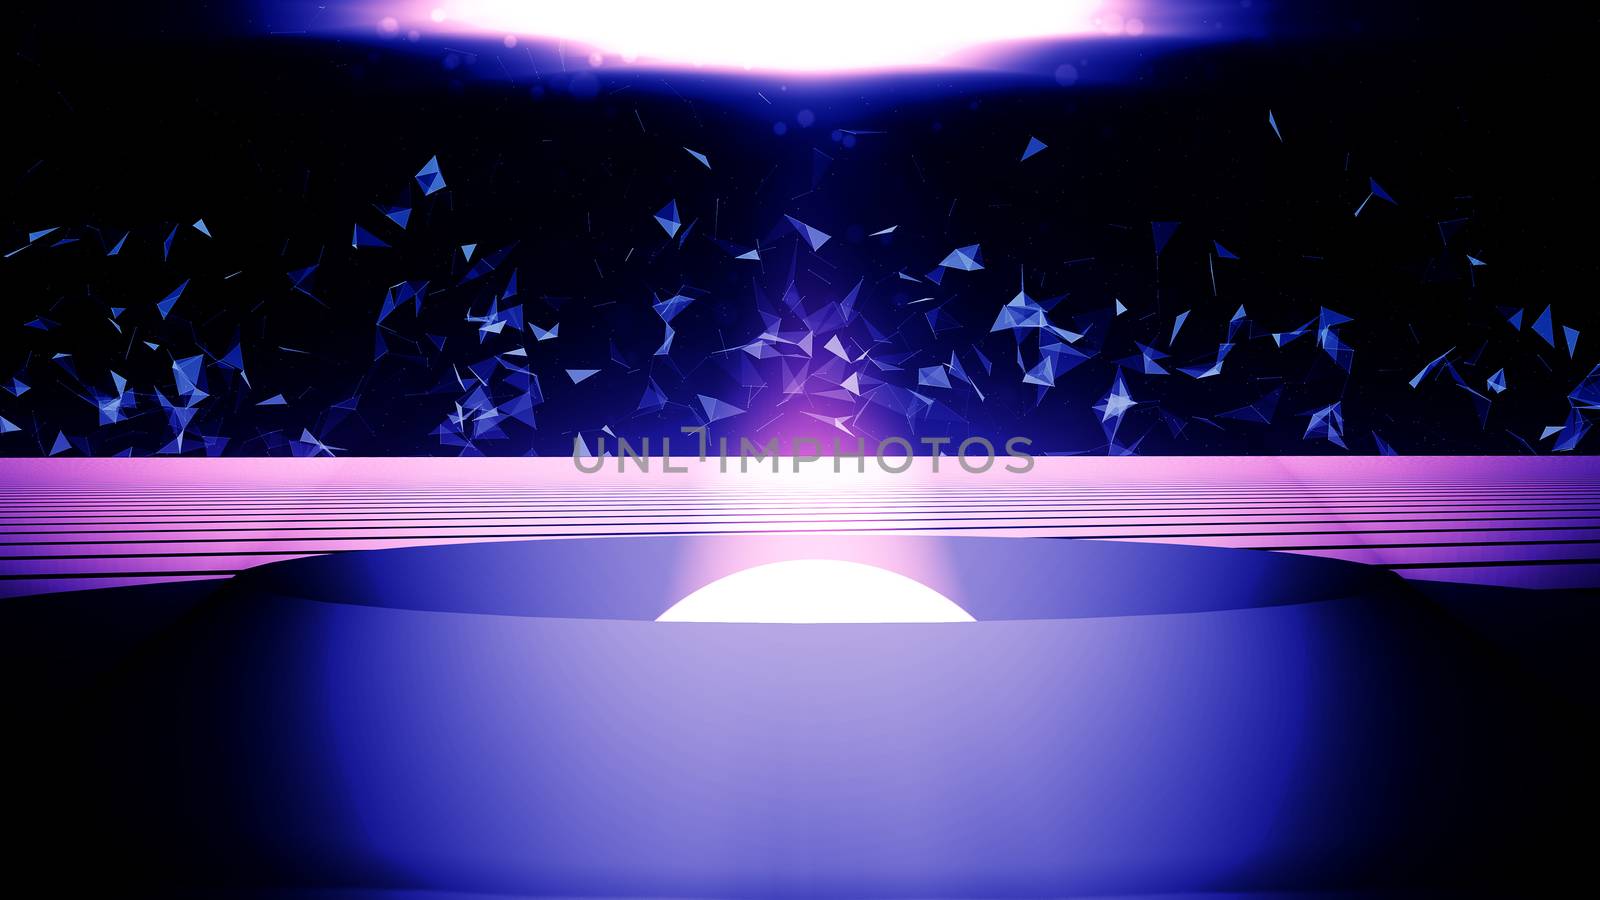 Abstract technology background with triangles and light. Technology elements